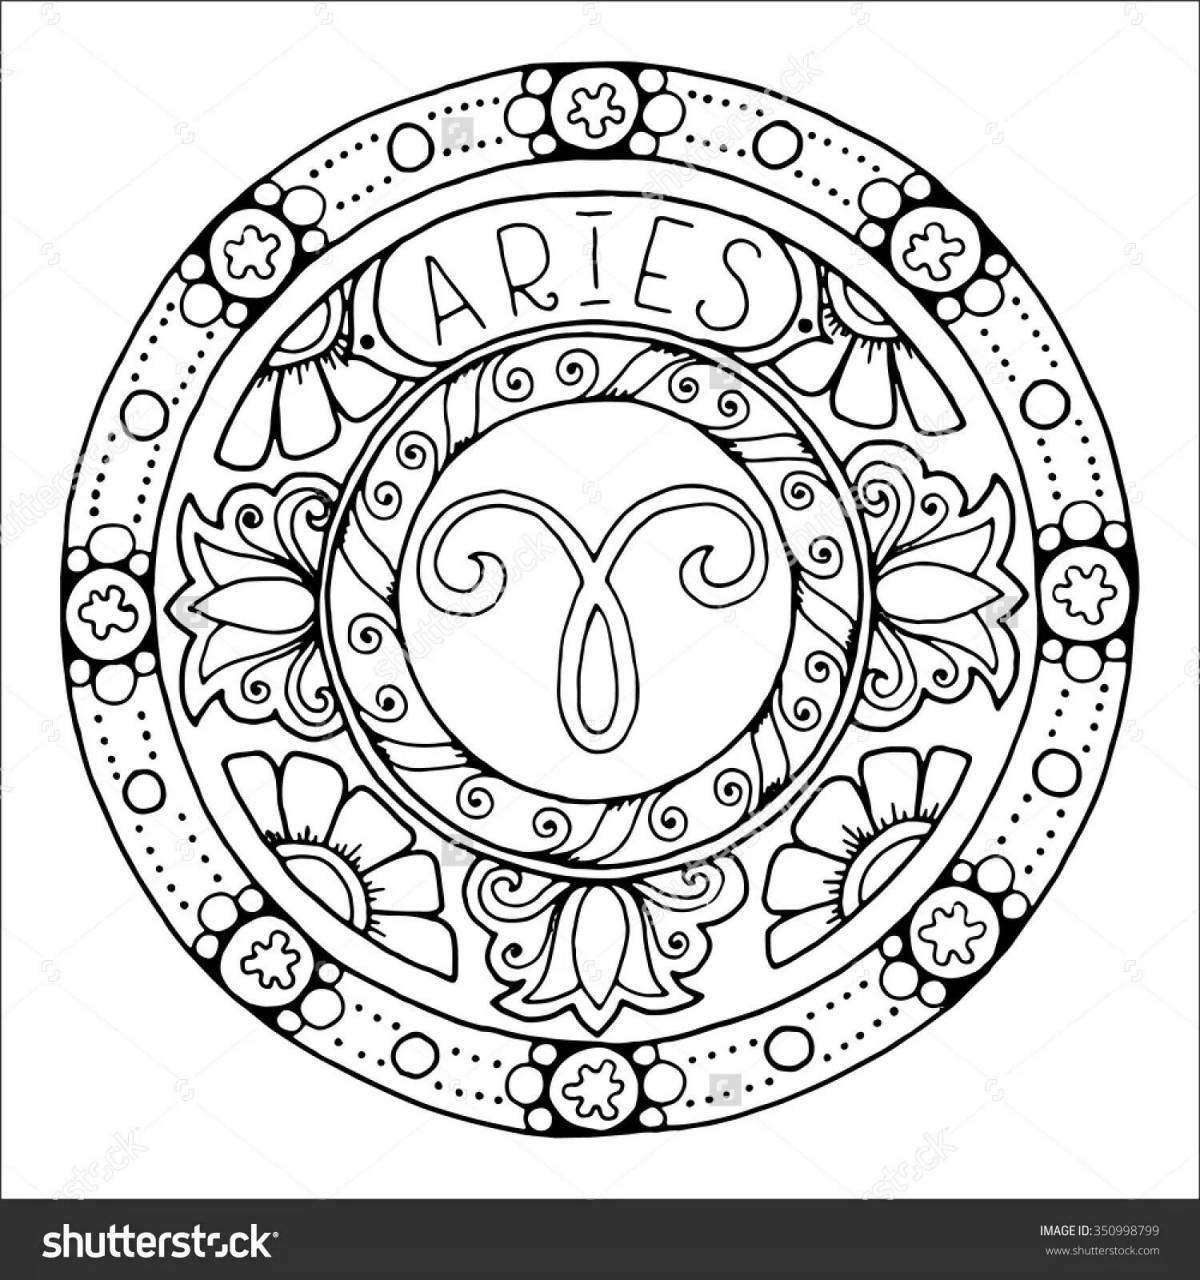 Charming ram coloring page